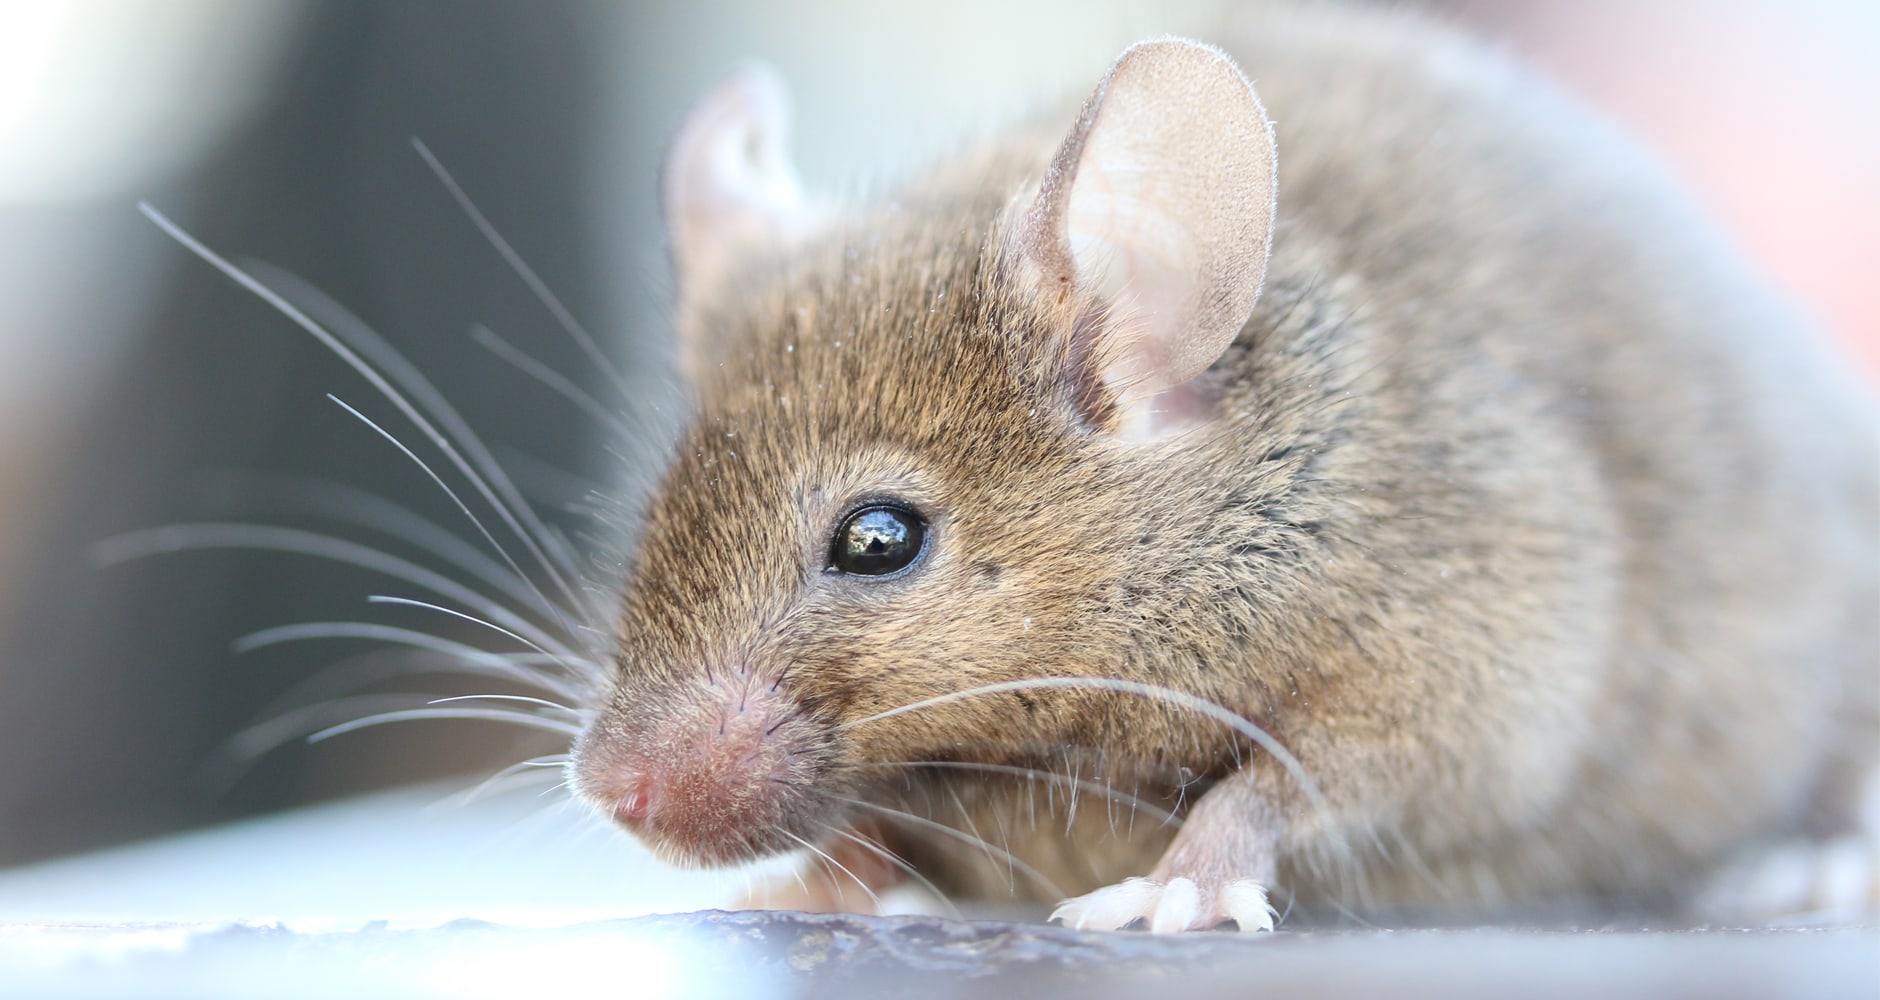 To better protect food, place rodent traps near warmth, shelter